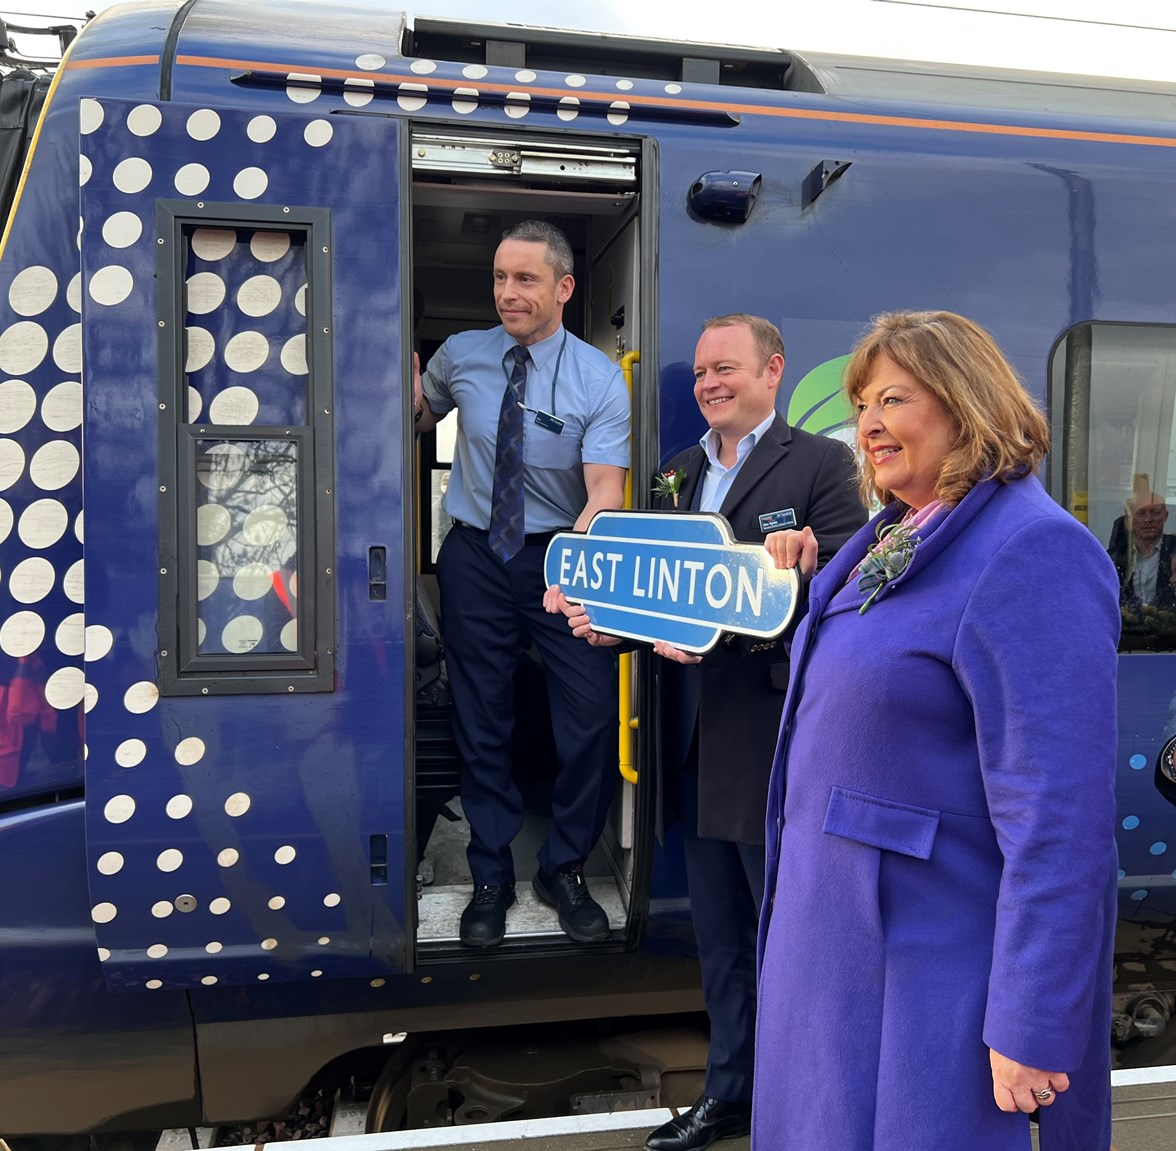 Transport minister opens new £15m railway station for East Linton